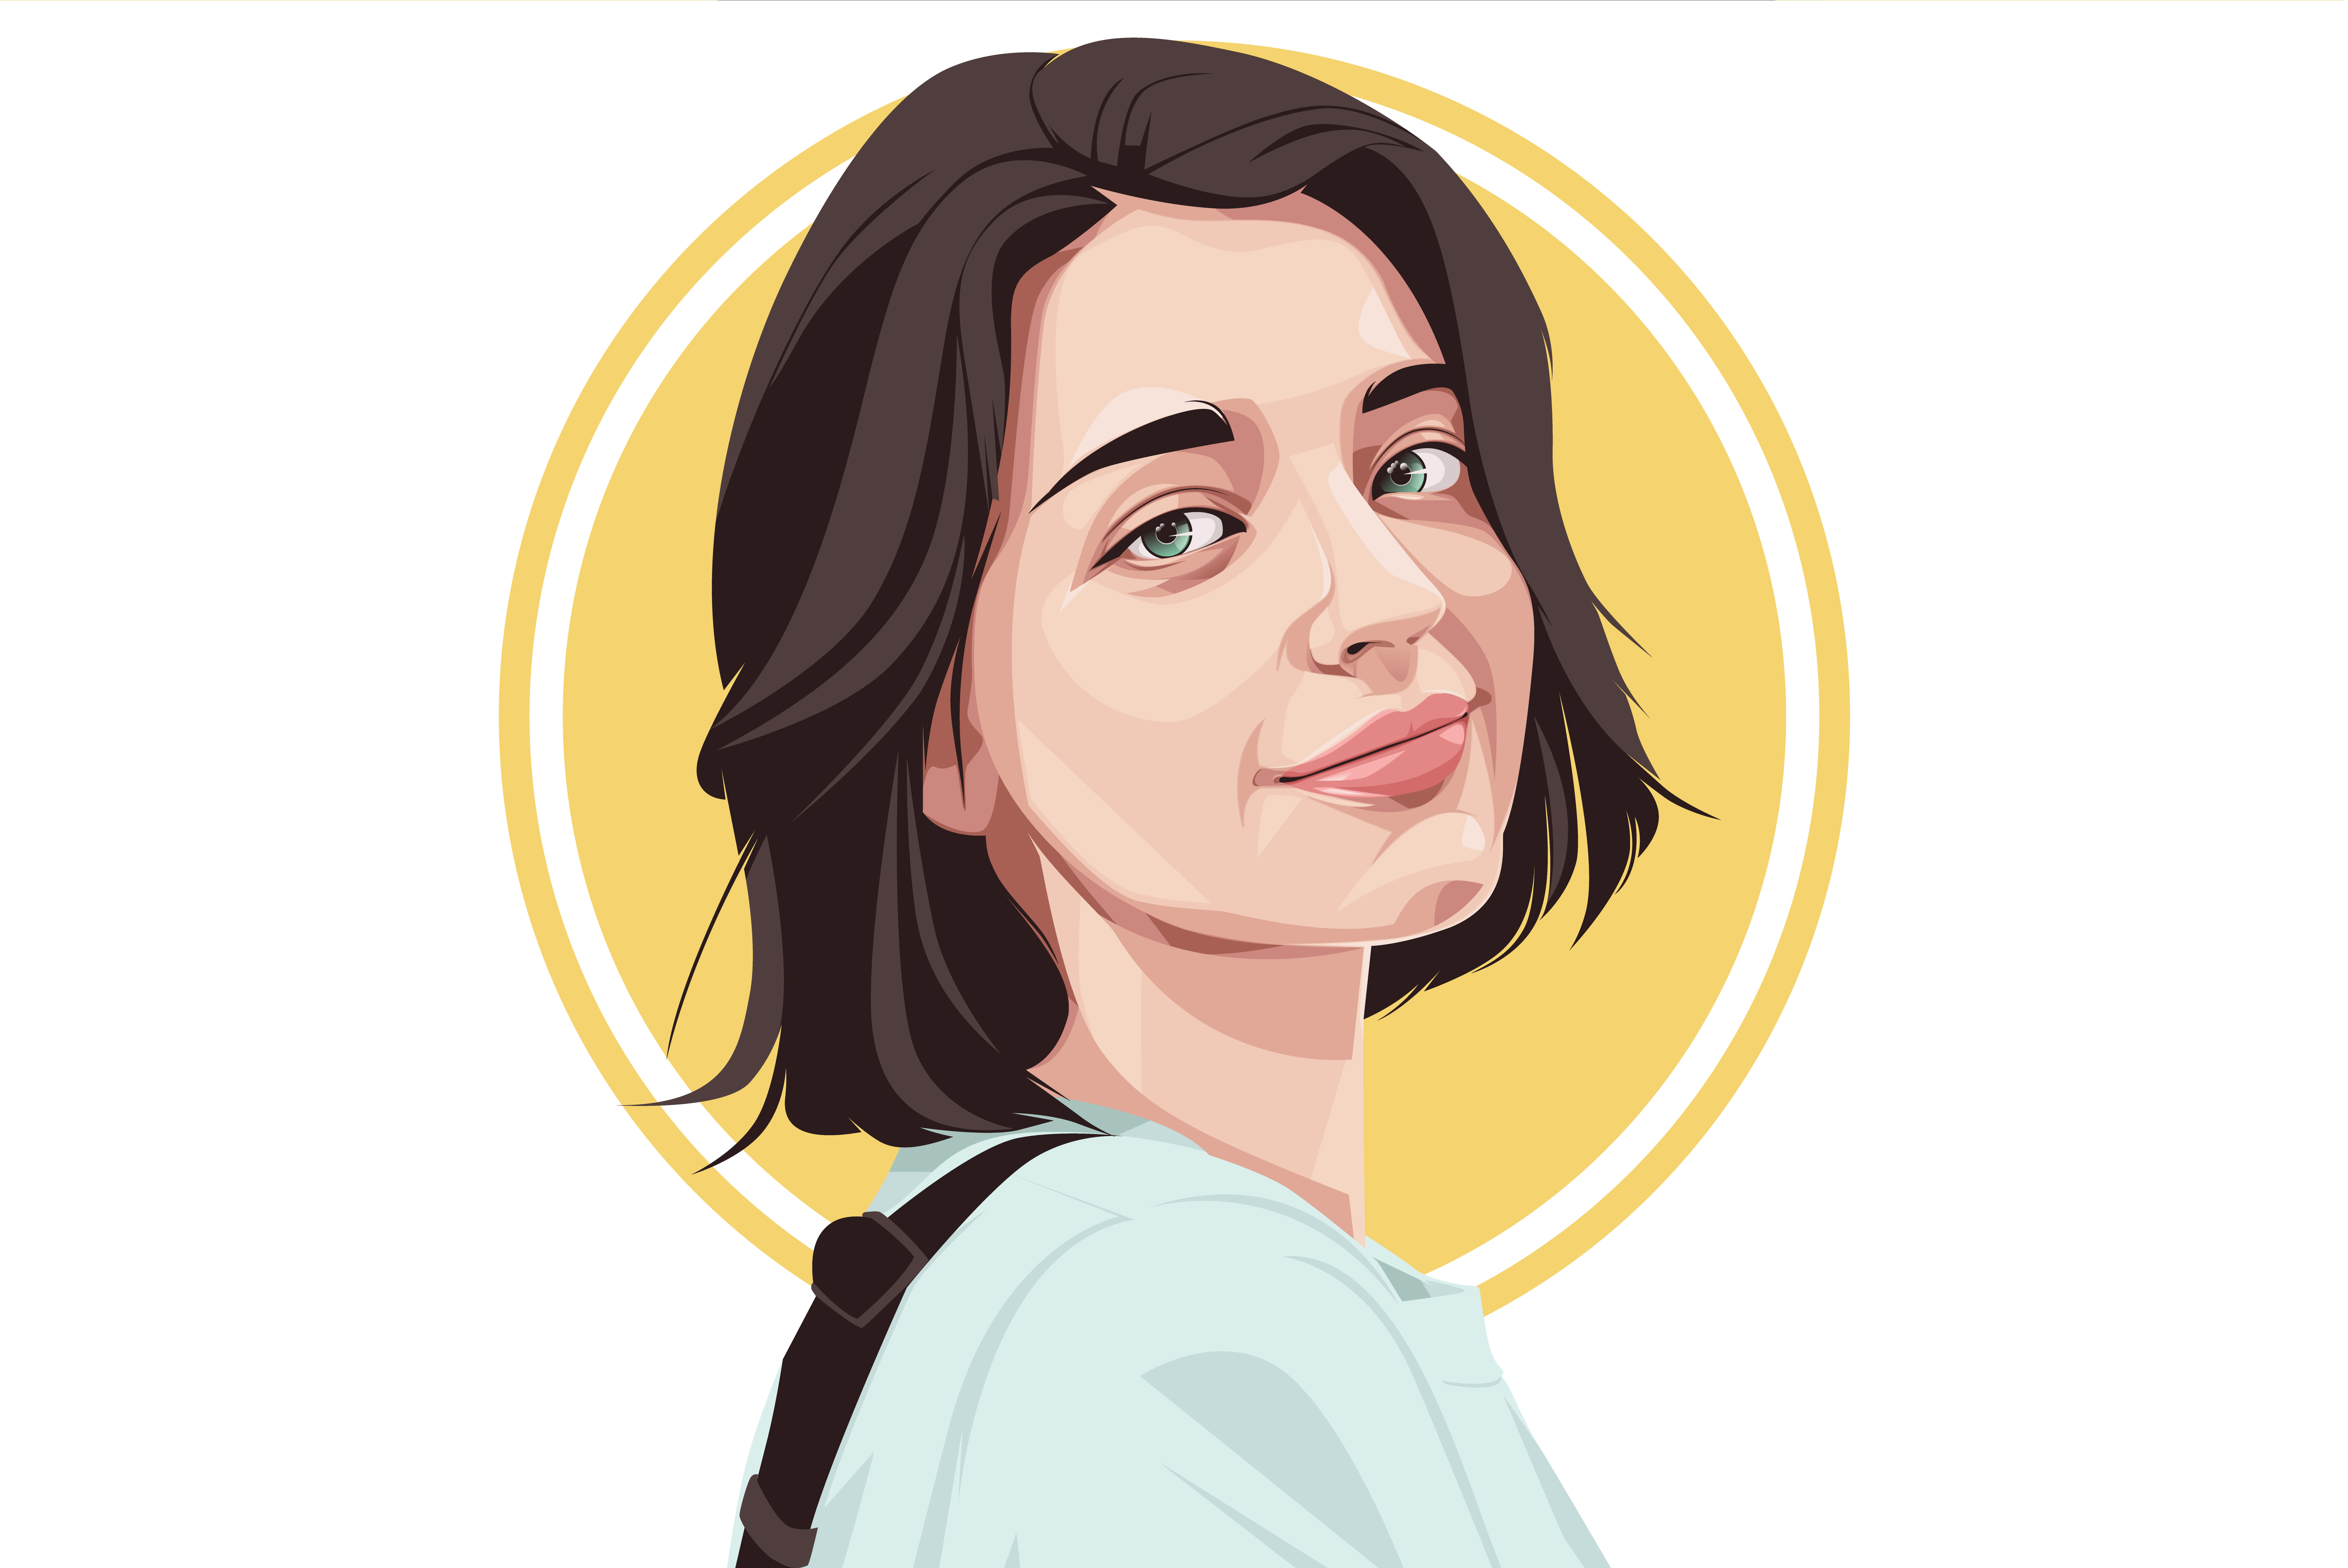 Draw Vector Portrait Illustration Of Your Photo, 59% OFF